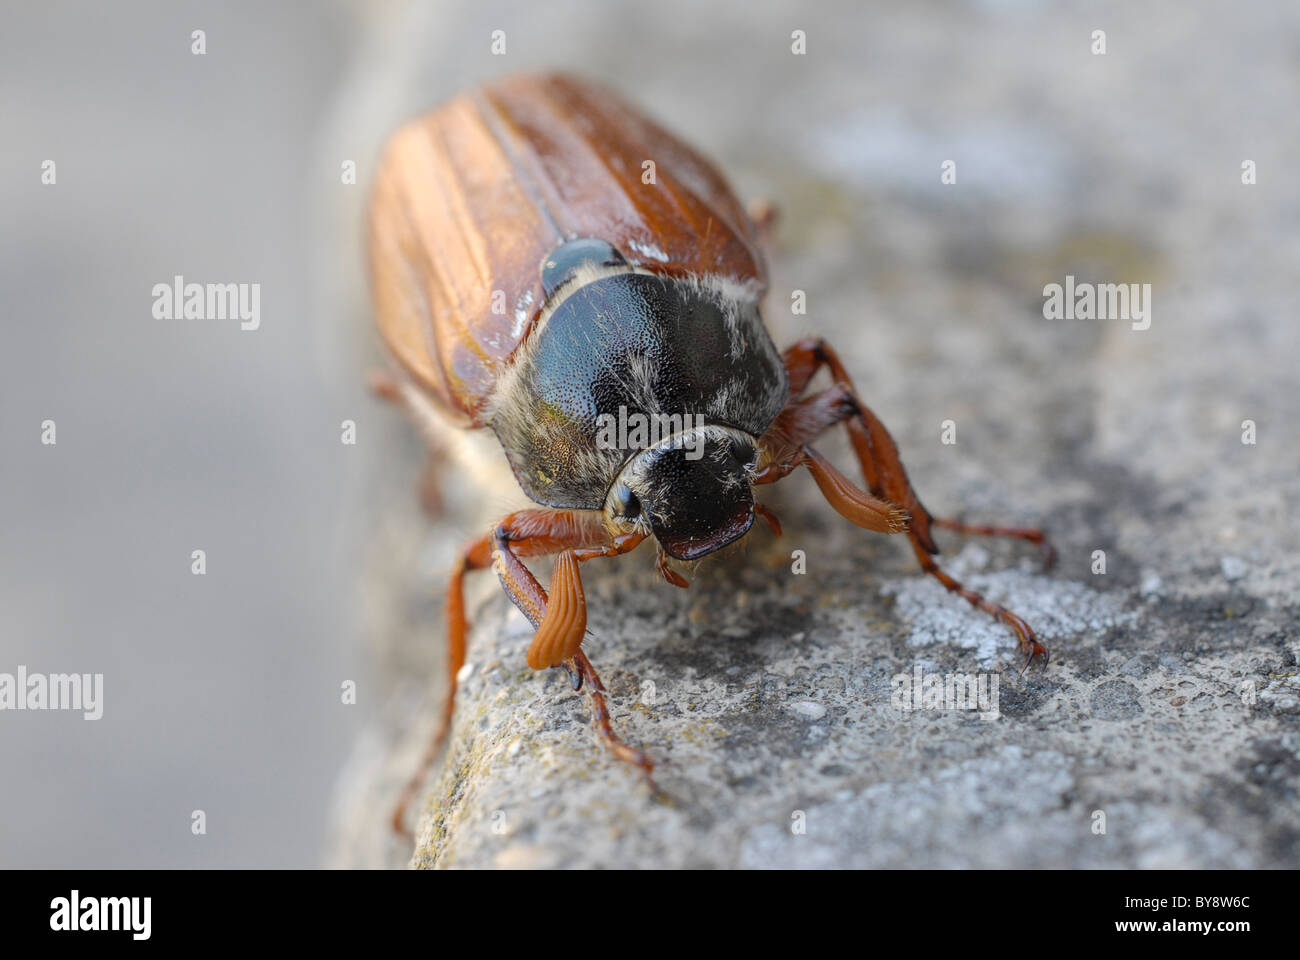 A macro shot of a common cockchafer, May Bug, Billy Witch, or Spang Beetle on a stone step.  They fly in May hence the name. Stock Photo